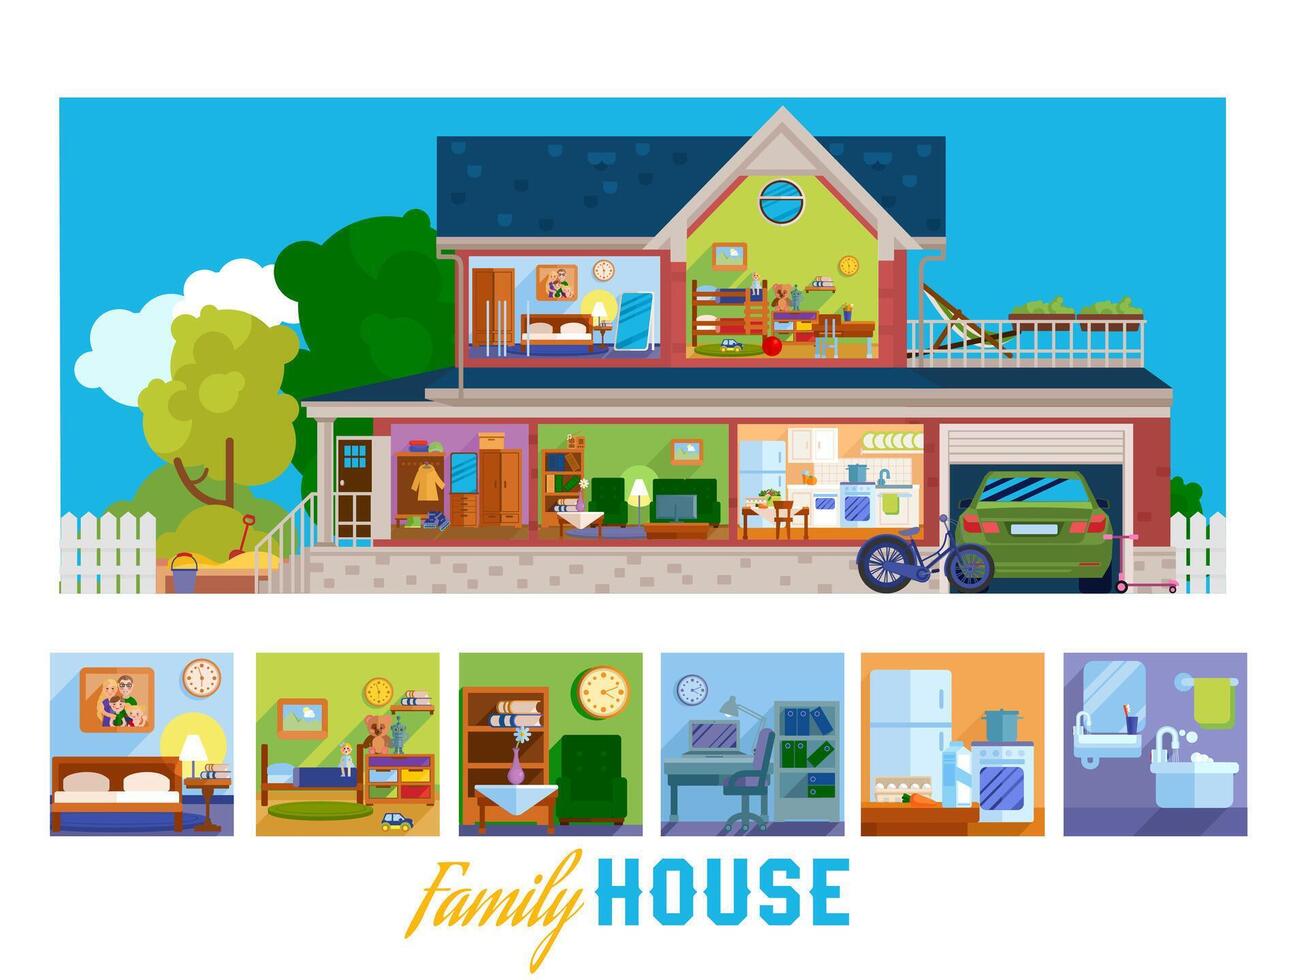 Family house. Illustration with rooms of large two-story house with garage Illustrator Artwork vector